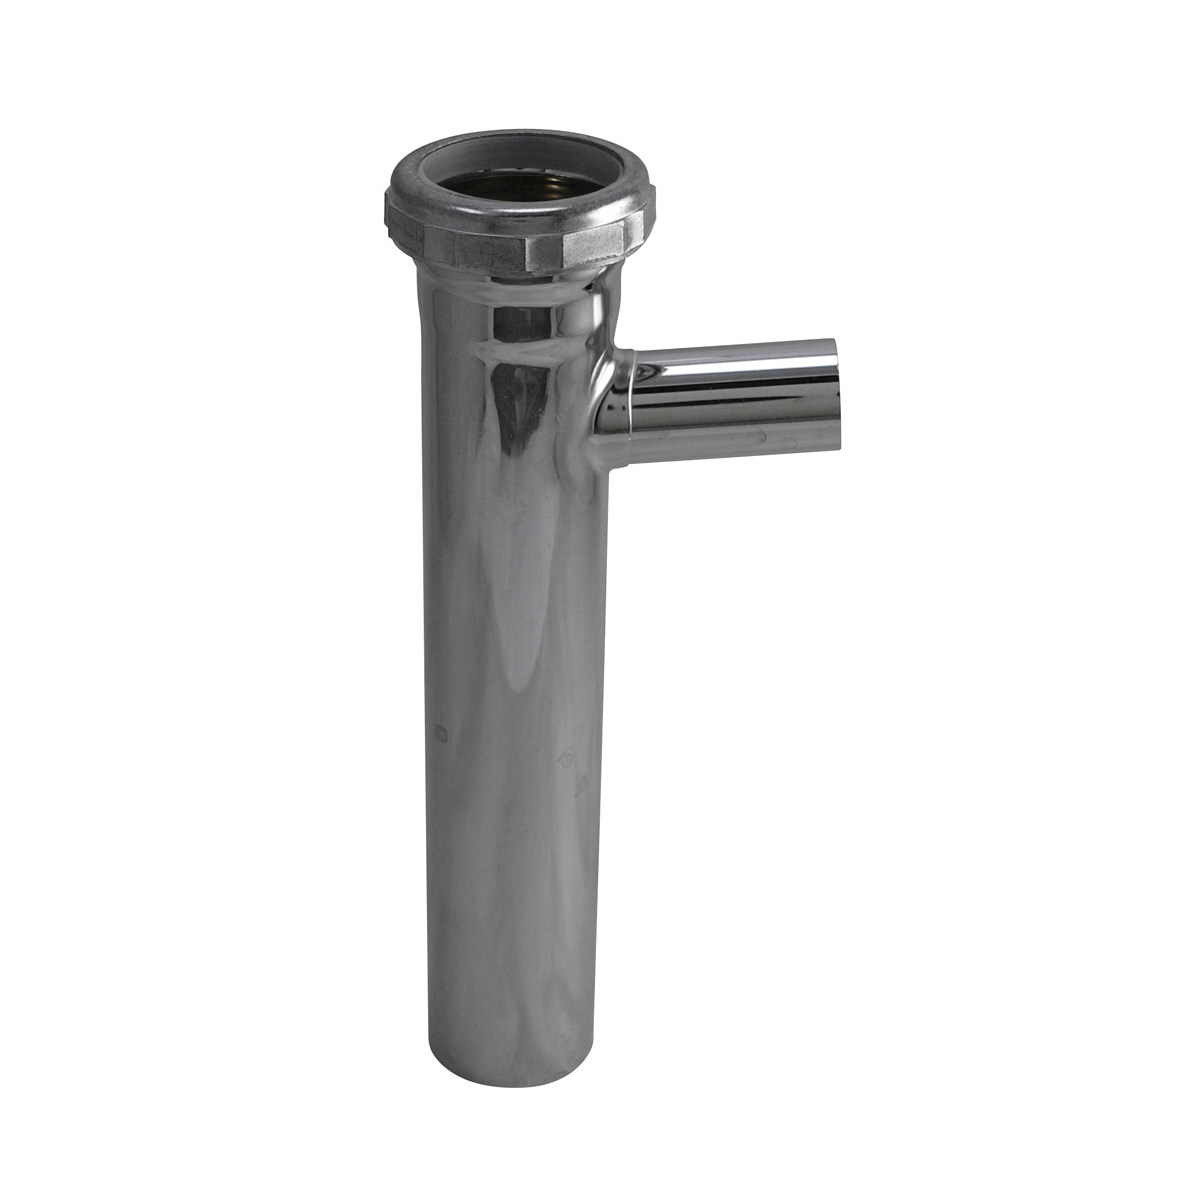 Keeney 54SN Branch Tailpiece, 1-1/2 in Pipe, 8 in L, 22 ga, Slip Joint Connection, Brass, Import